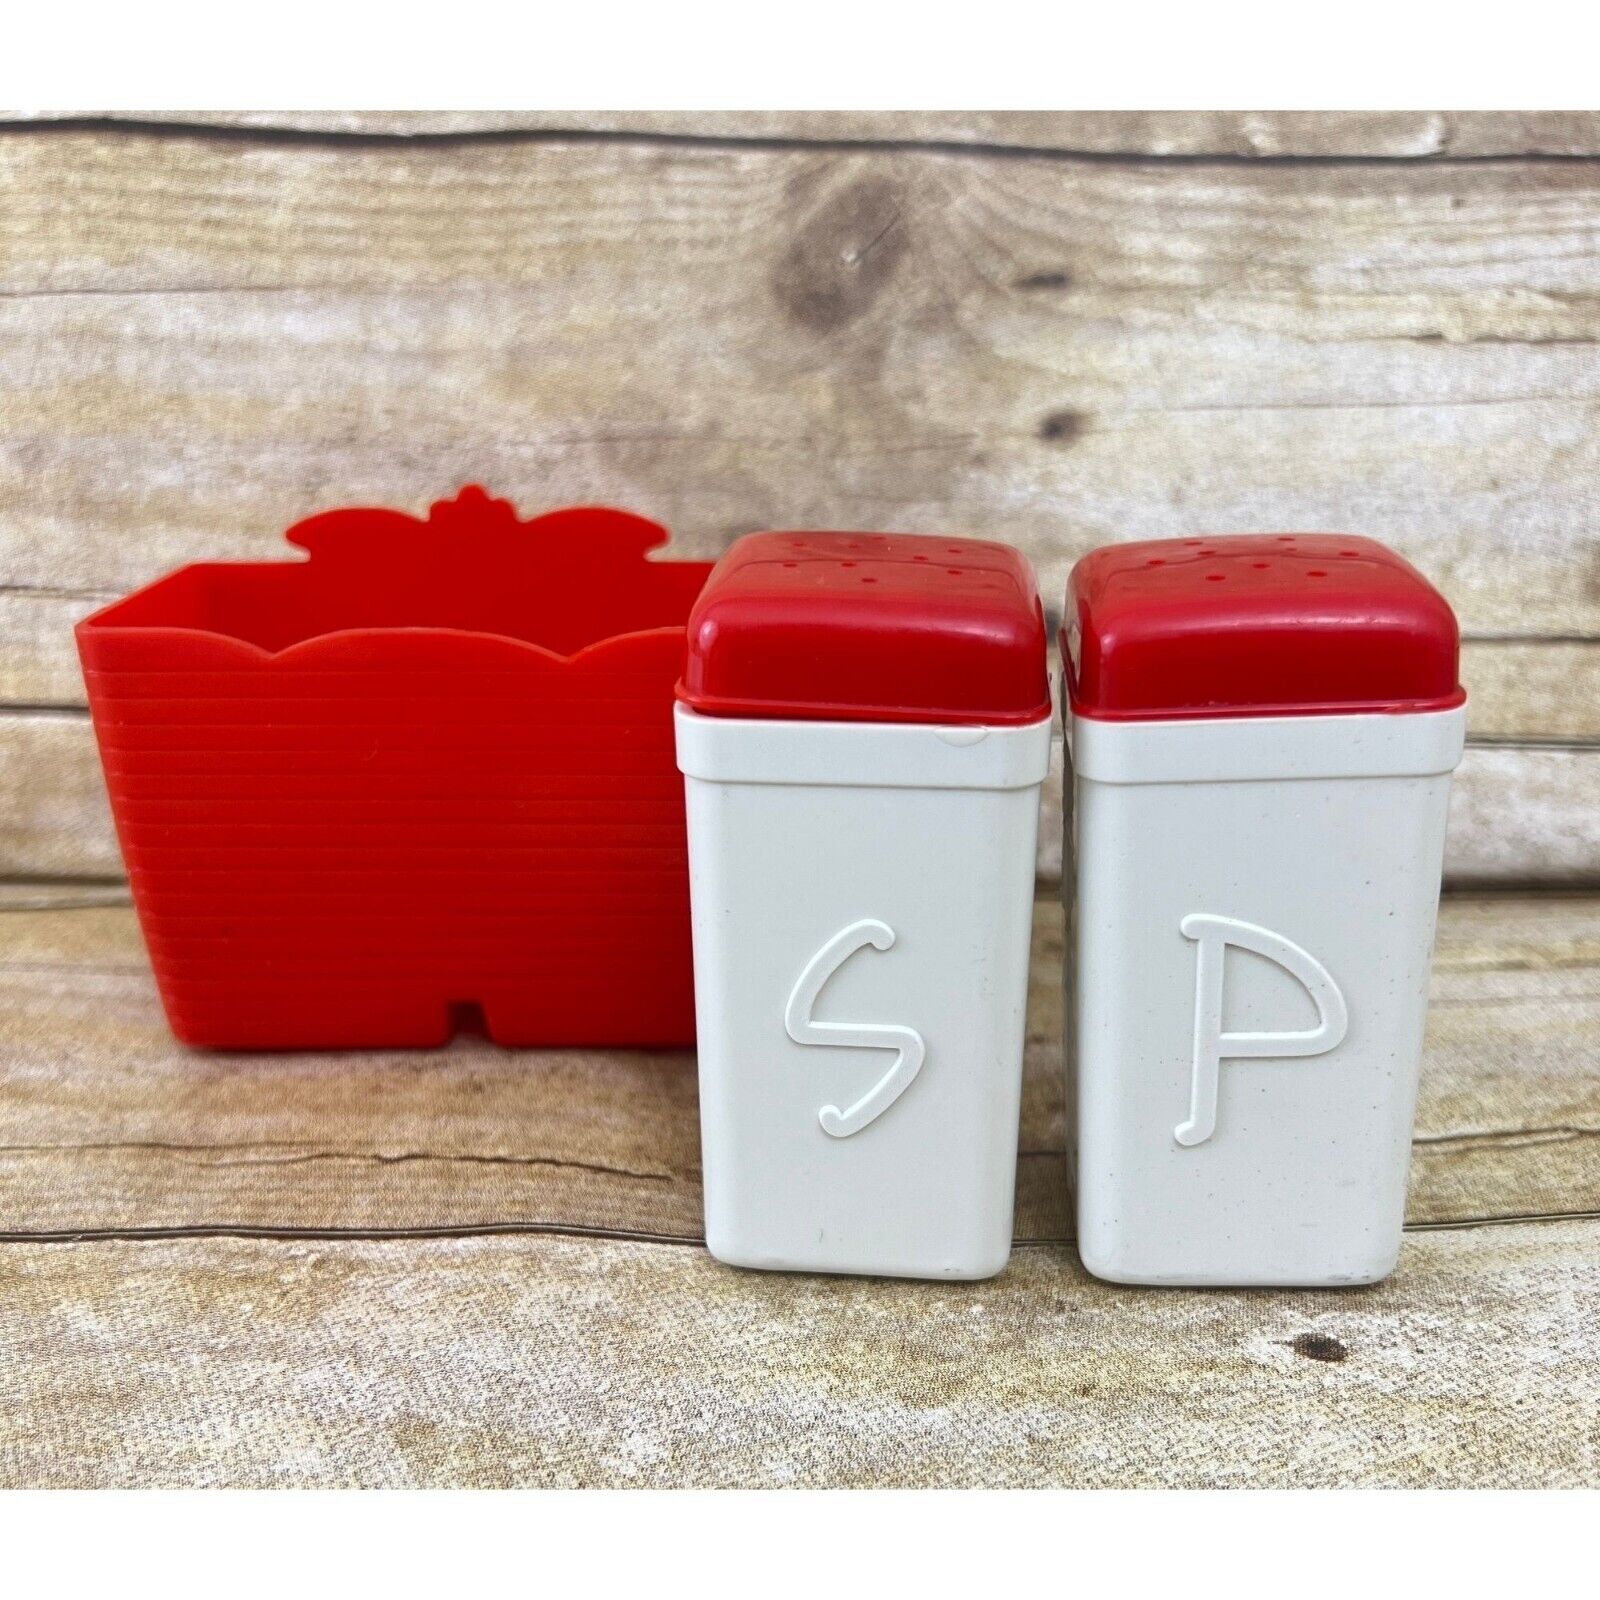 Vintage 1950s Salt & Pepper Shakers with Caddy Superlon Products  USA Red White